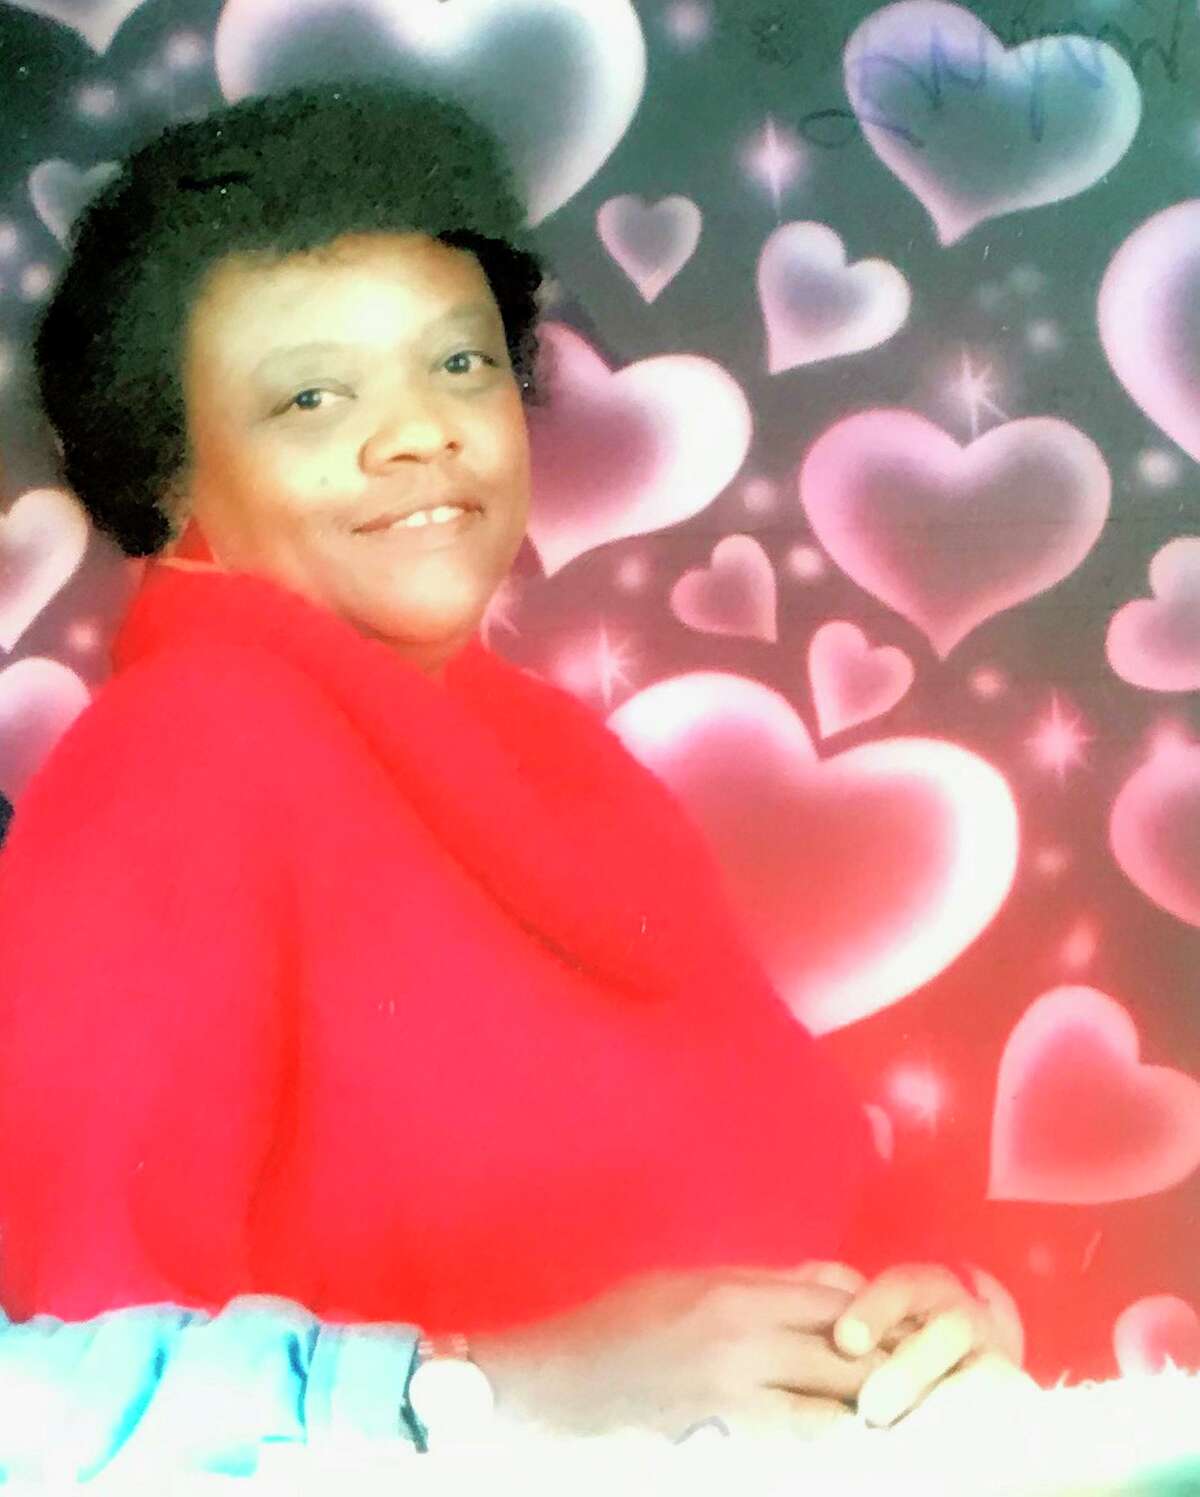 Janice Dotson-Stephens, seen in an undated courtesy photo provided by her family, died in the Bexar County Jail Dec. 14, 2018 after spending almost five months there pretrial on a misdemeanor criminal trespassing charge. In the span of about a year, three defendants facing criminal trespass charges have died in jail.